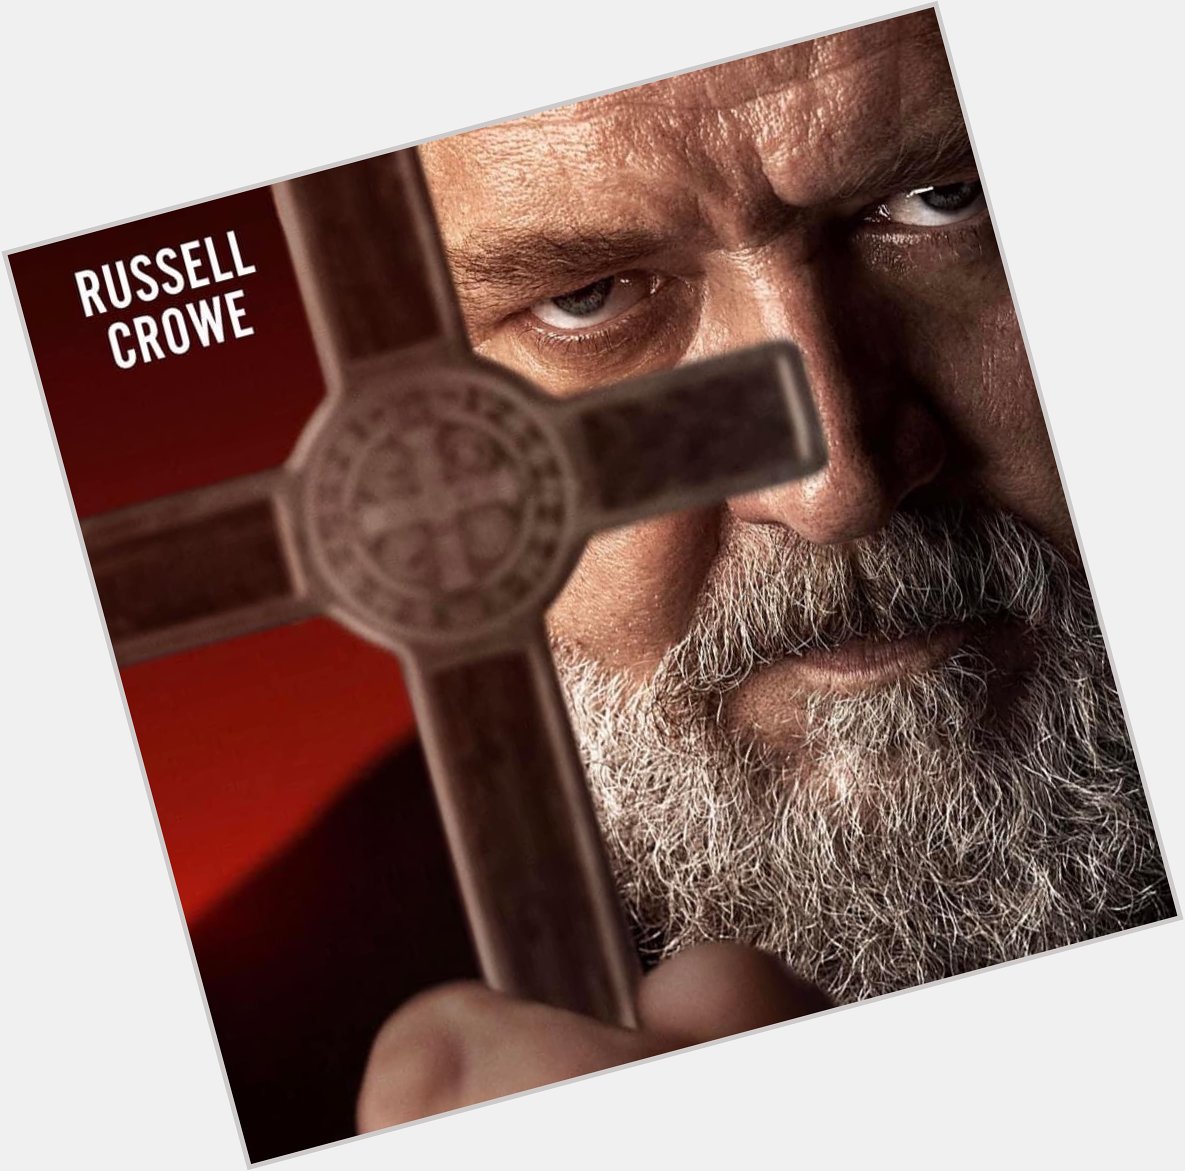 Happy belated Birthday Russell Crowe
April 7 1964 